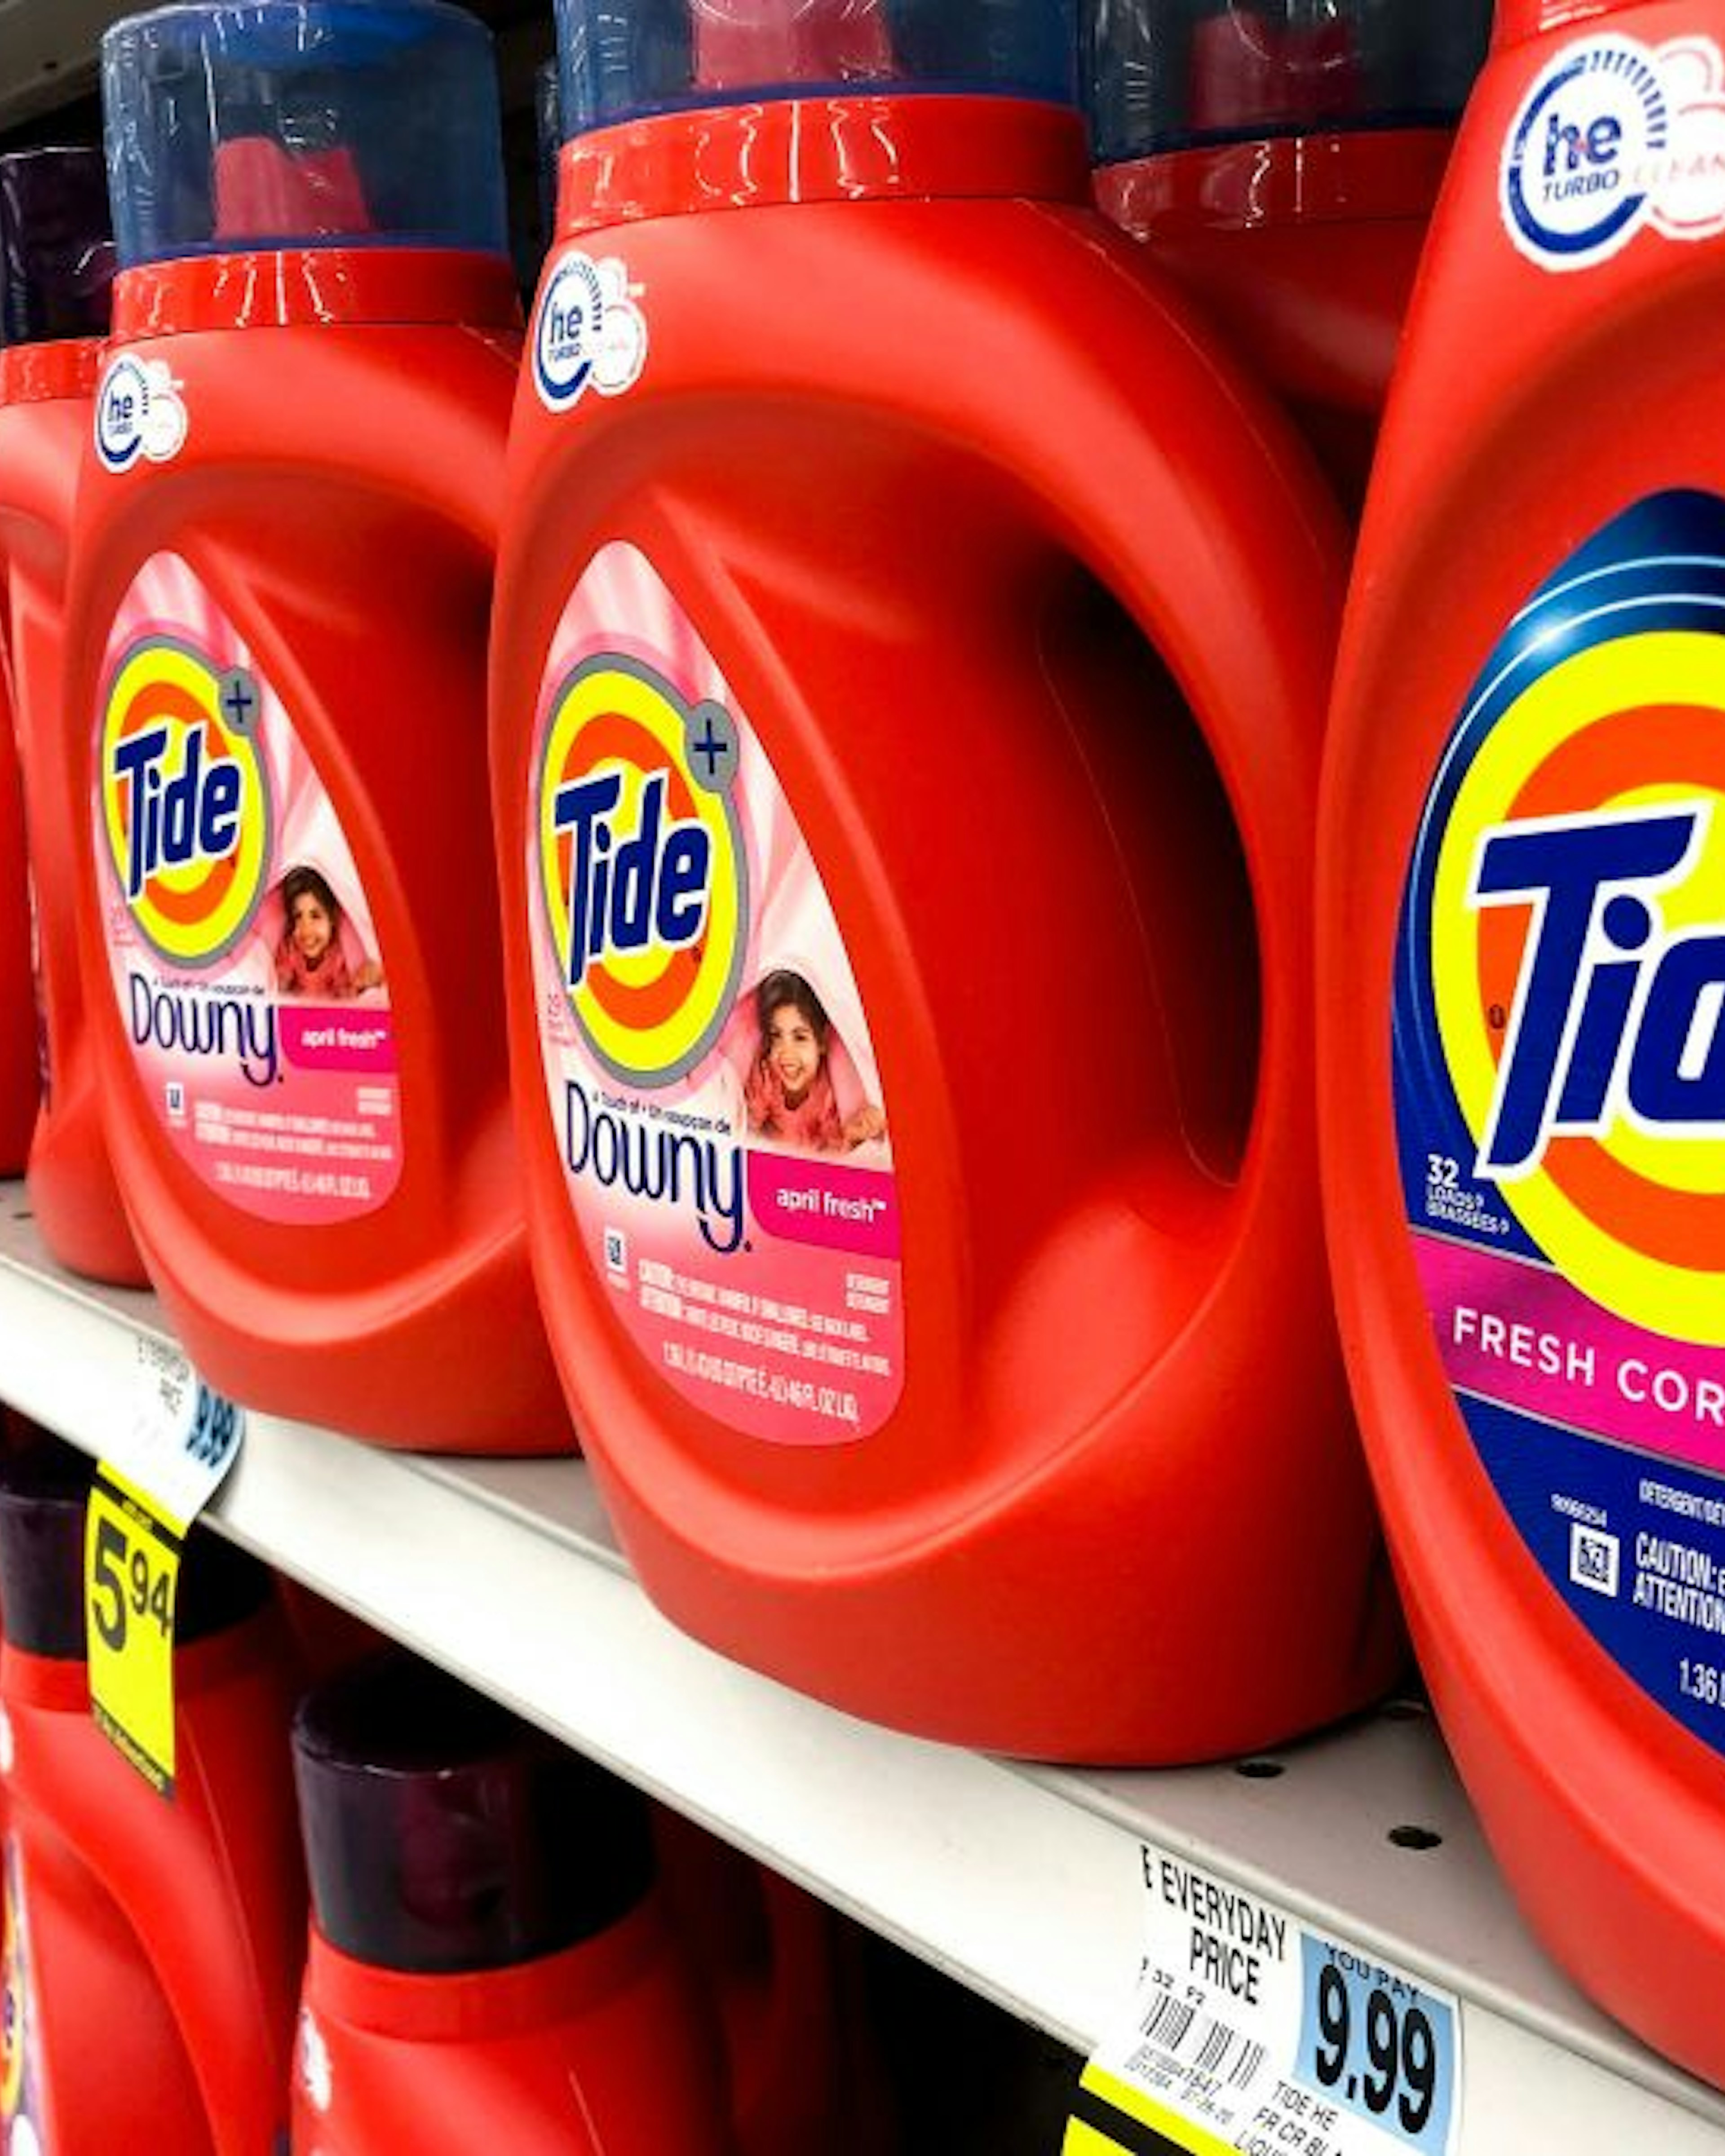 LOS ANGELES, CALIFORNIA - JULY 30: Bottles of Tide detergent, a Procter &amp; Gamble product, are displayed for sale in a pharmacy on July 30, 2020 in Los Angeles, California. Procter &amp; Gamble reported a sales surge of 6 percent, its strongest annual sales gain since 2006. (Photo by Mario Tama/Getty Images)